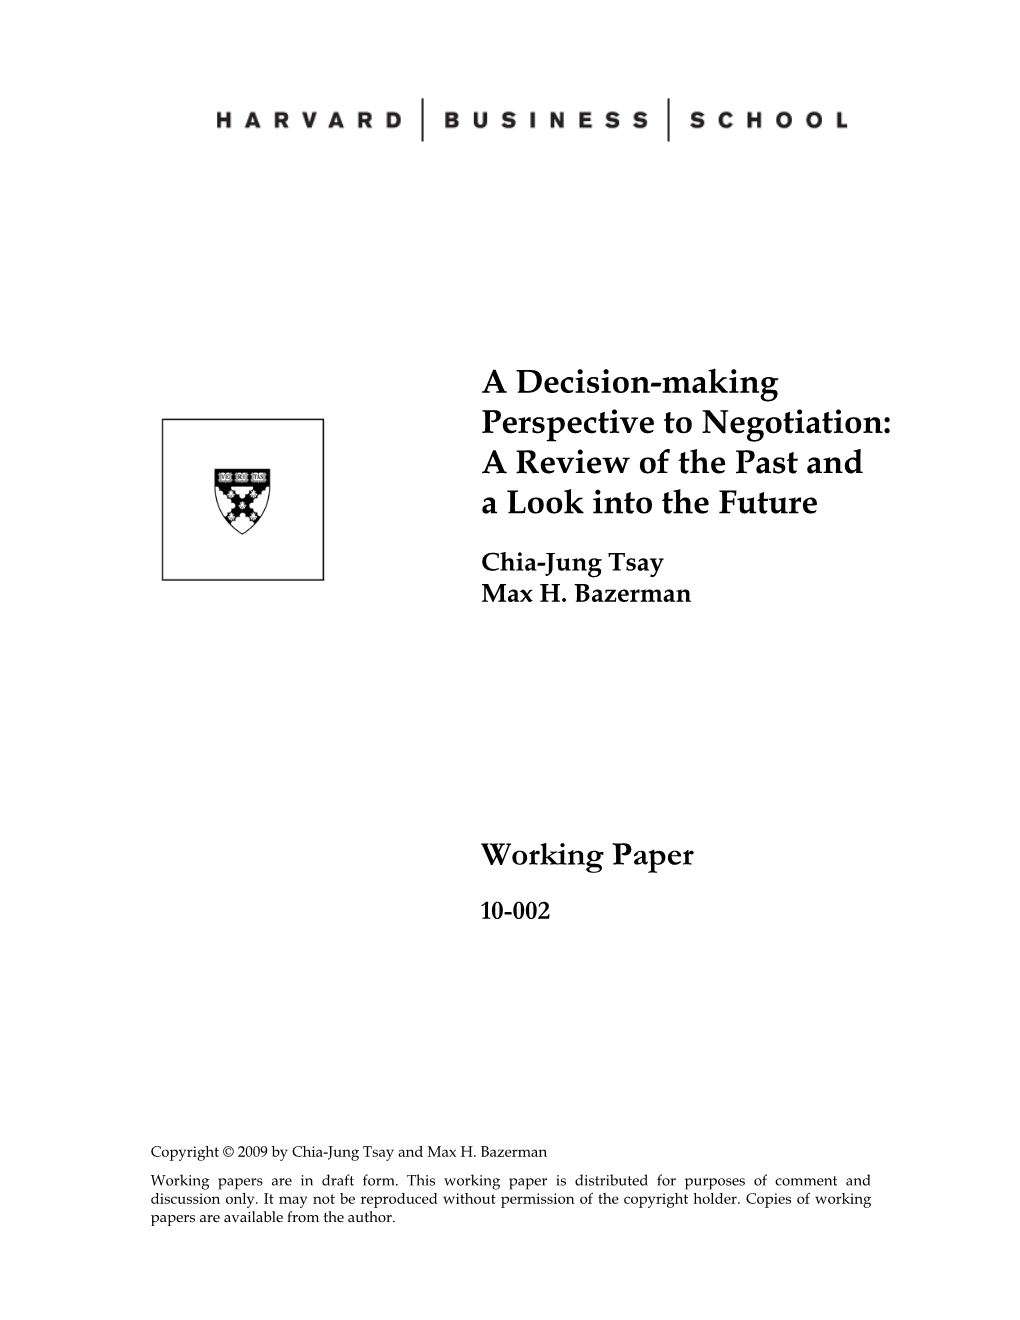 A Decision-Making Perspective to Negotiation: a Review of the Past and a Look Into the Future